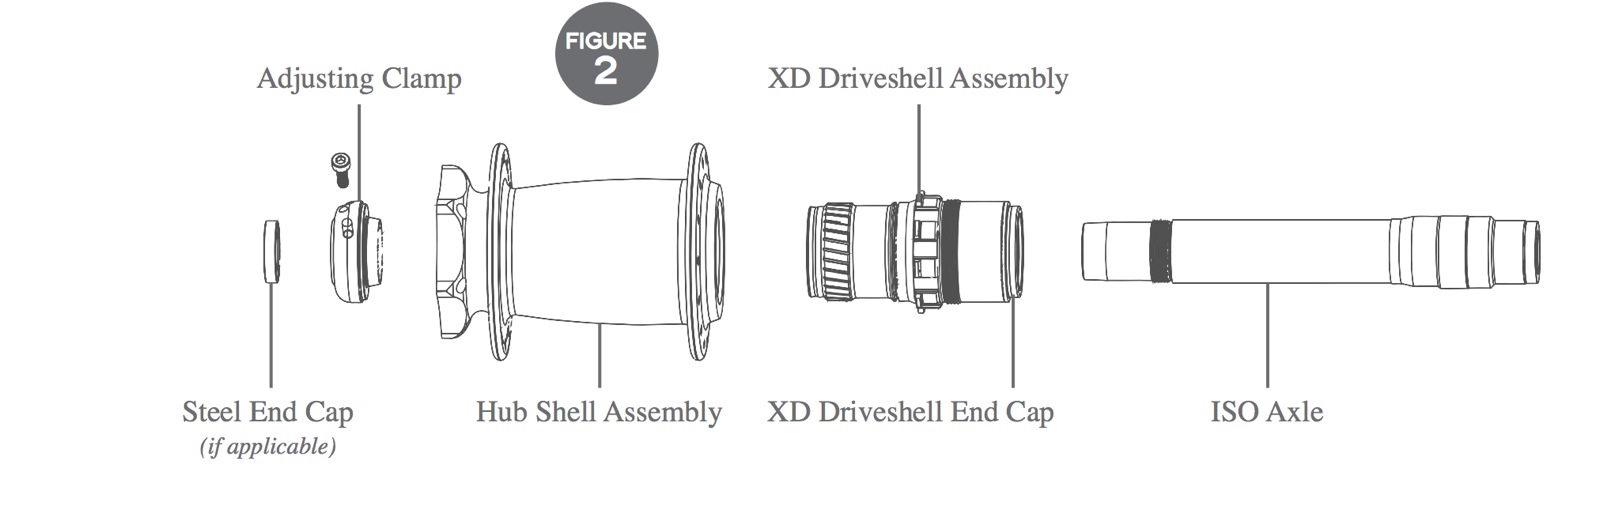 King XD RingDrive schematic